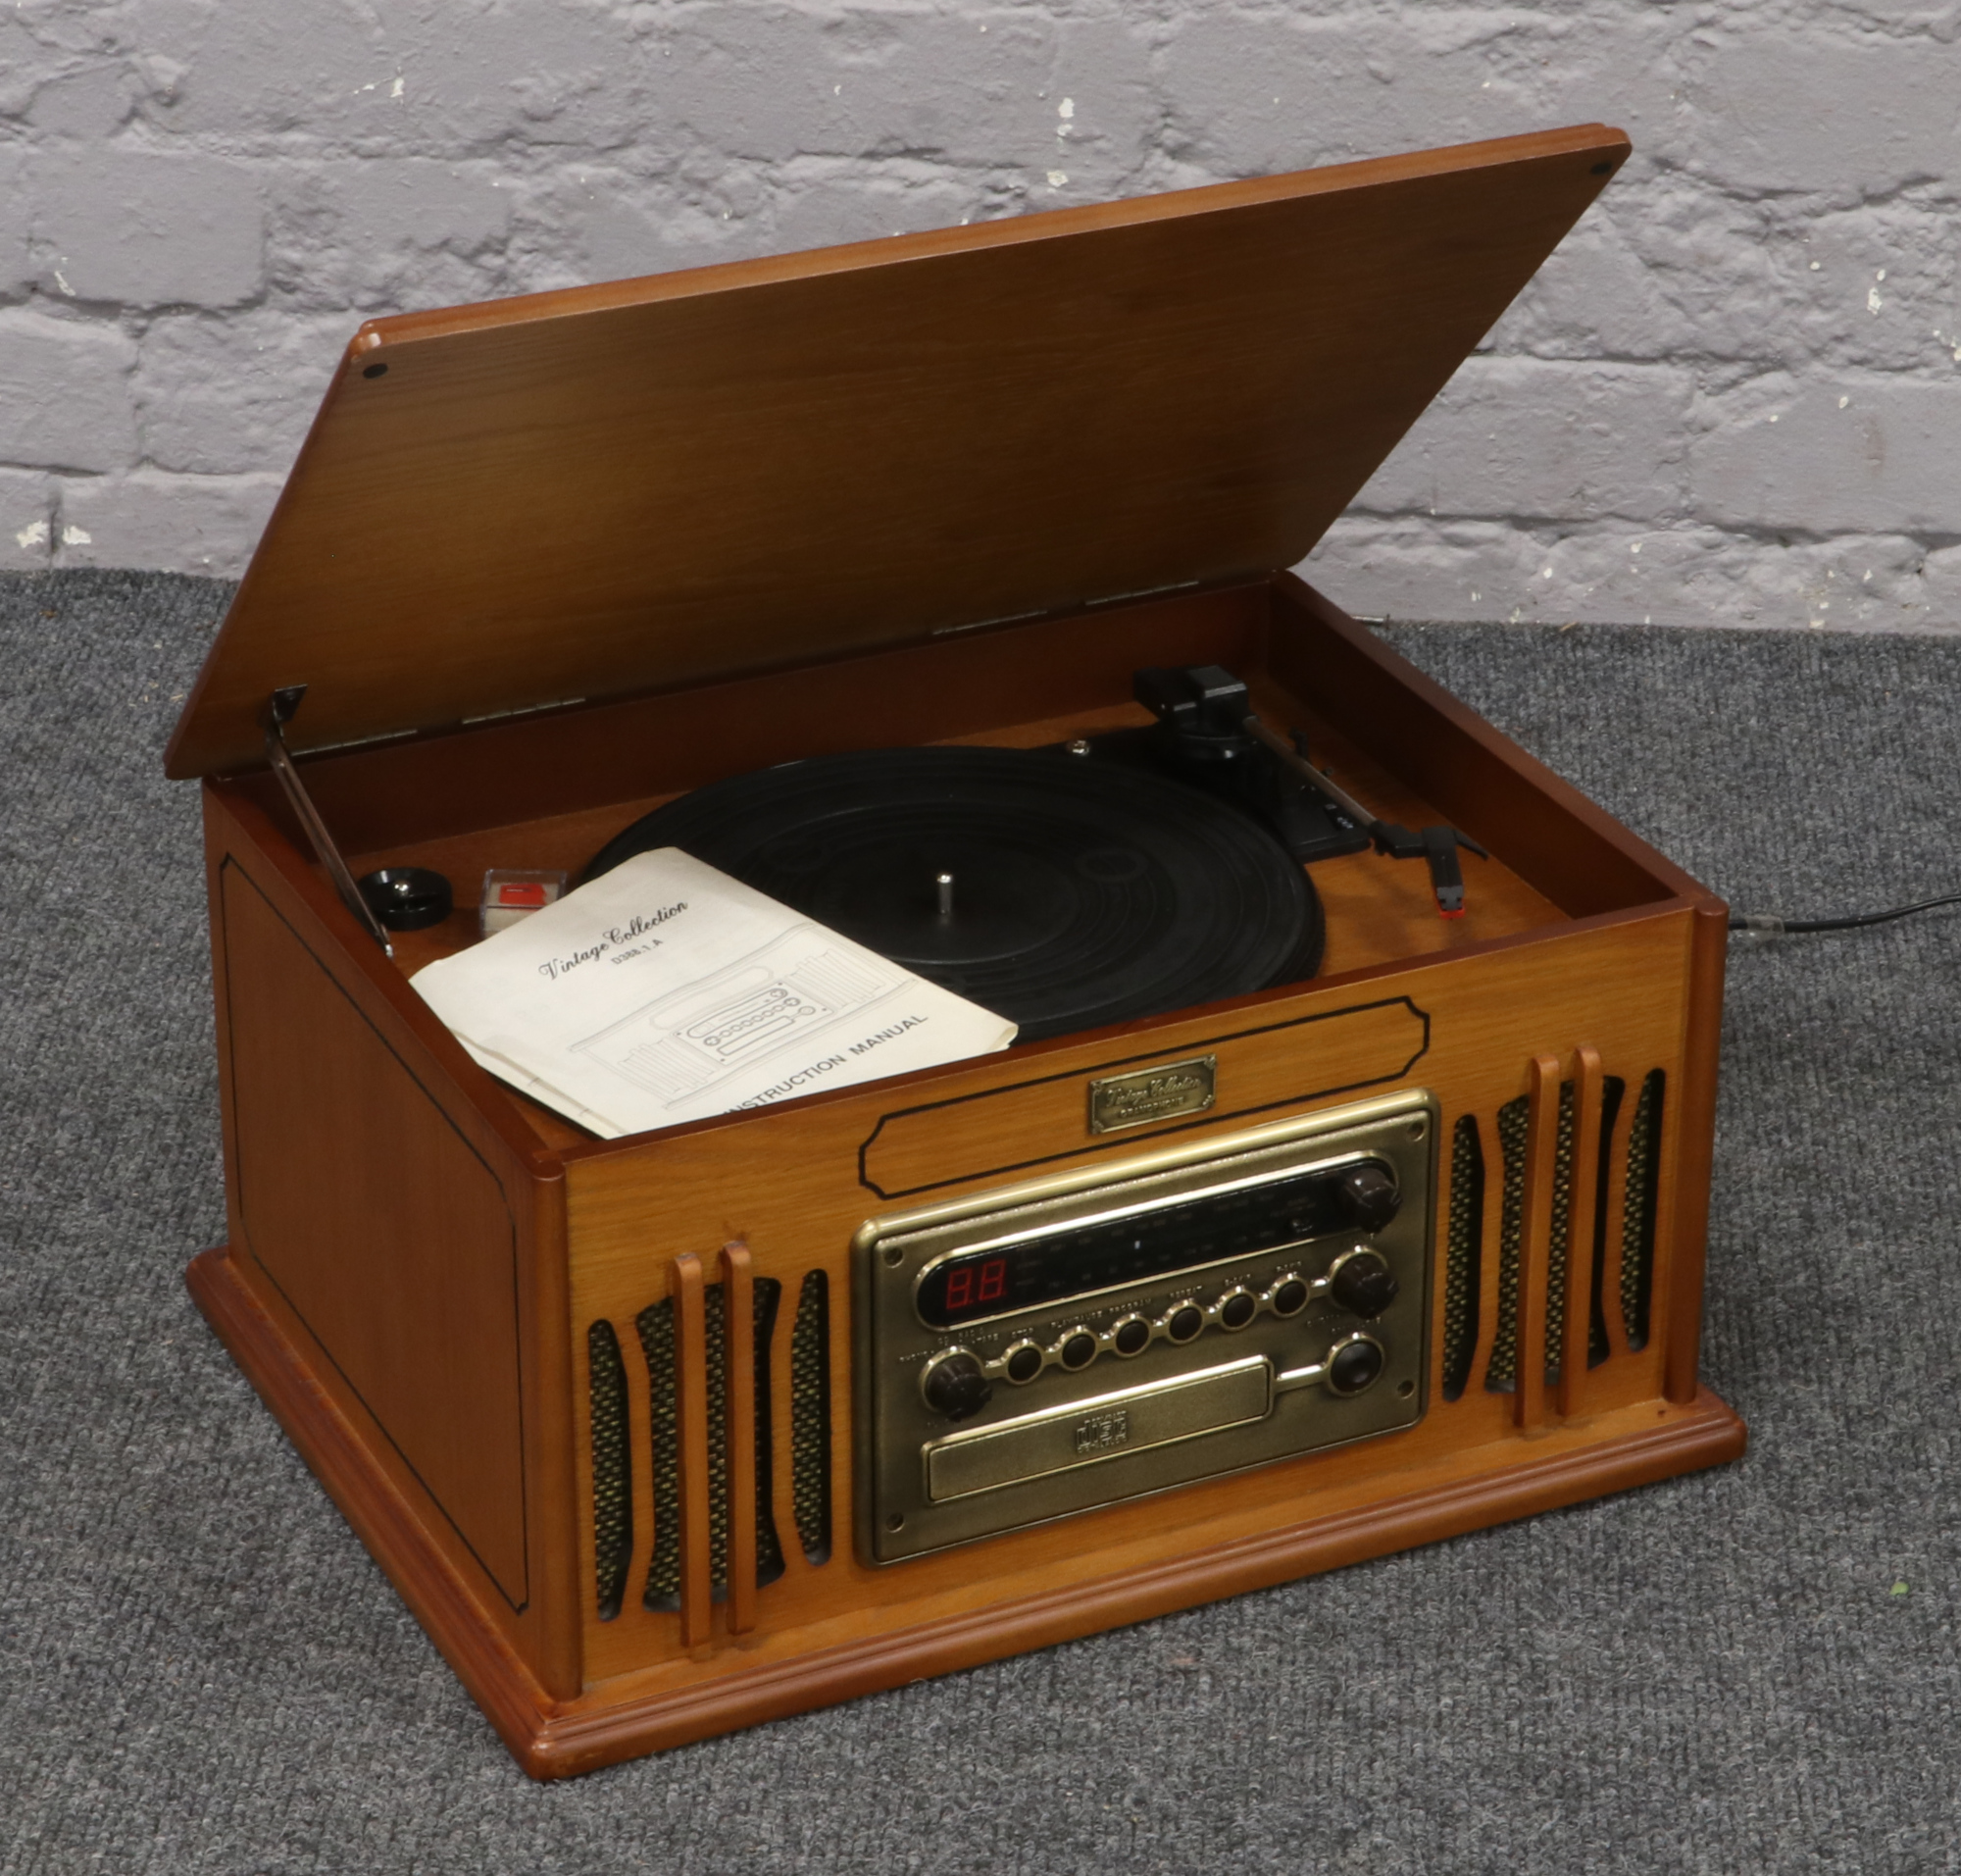 A vintage gramophone with built in turntable, tuner and CD player complete with instruction